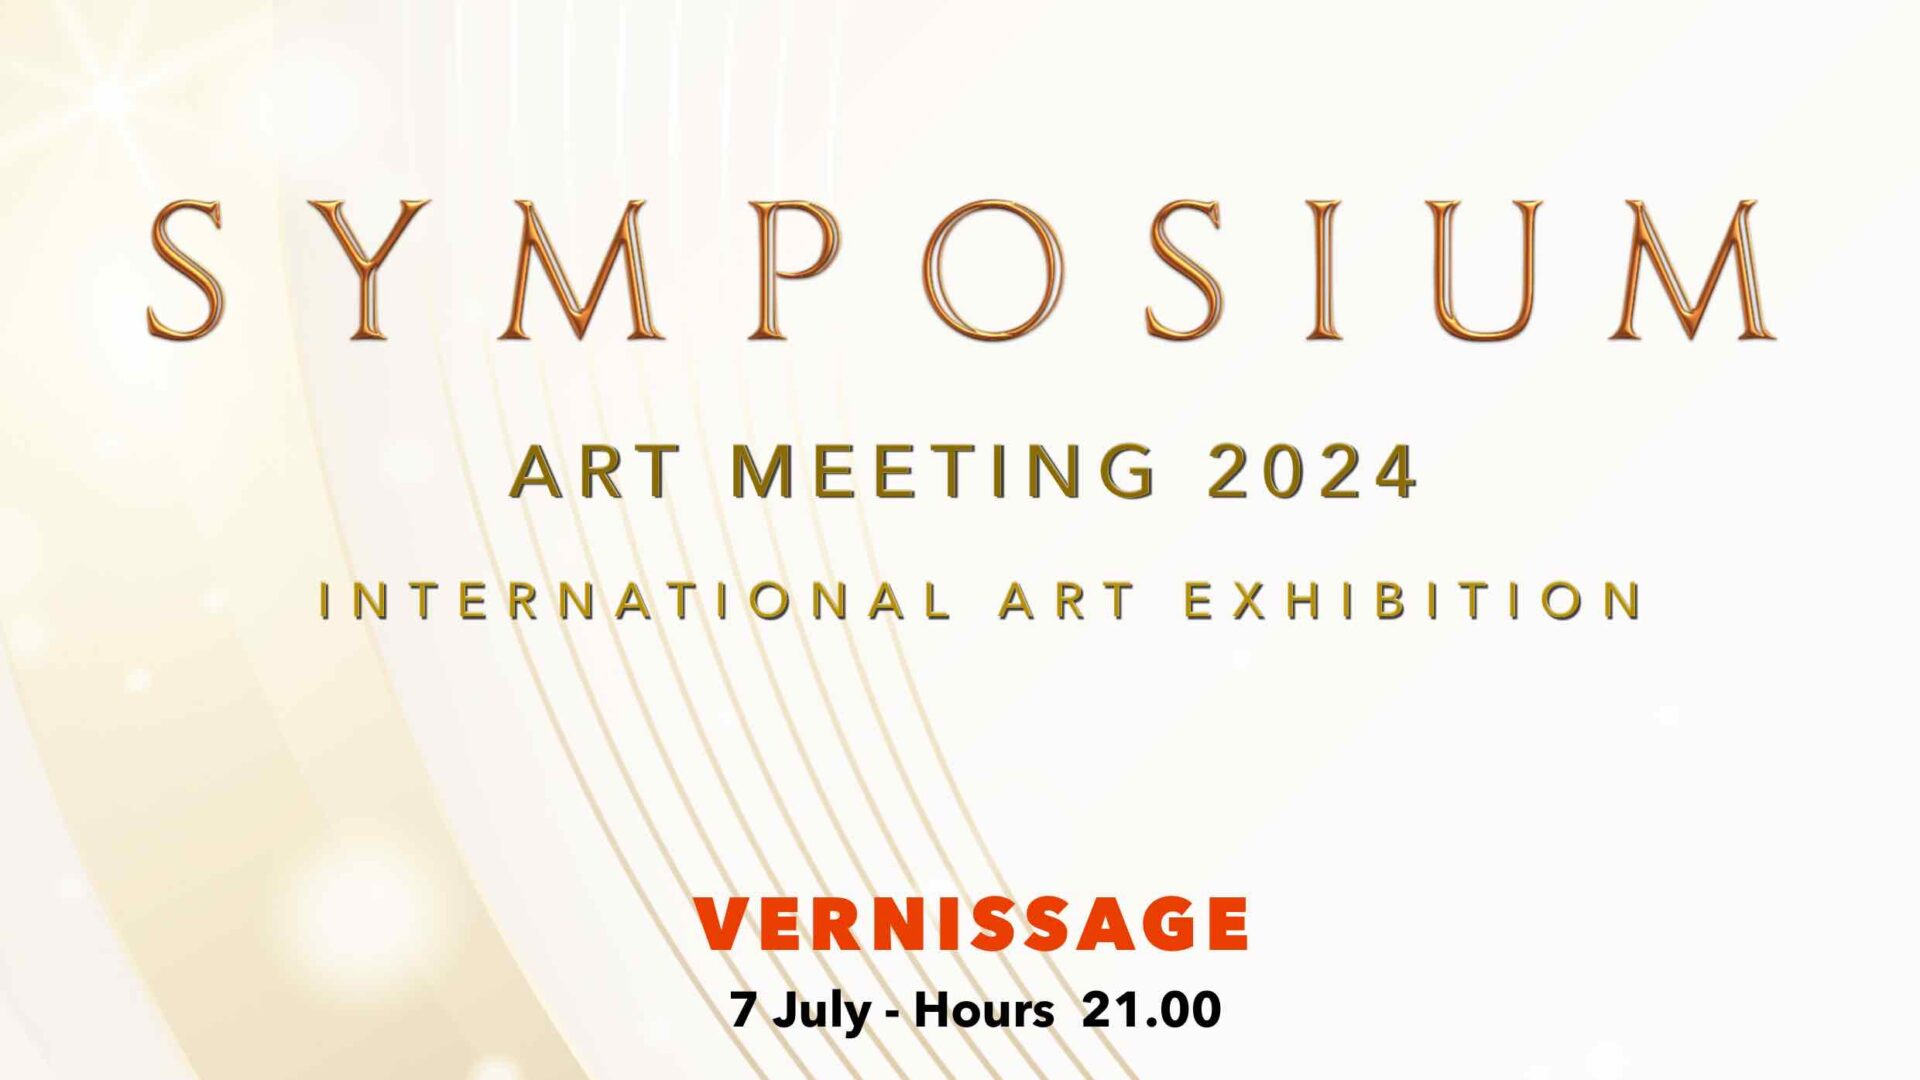 (English) – Sign up and participate in the – Symposium Art Meeting 2024 – 7 July – 30 September